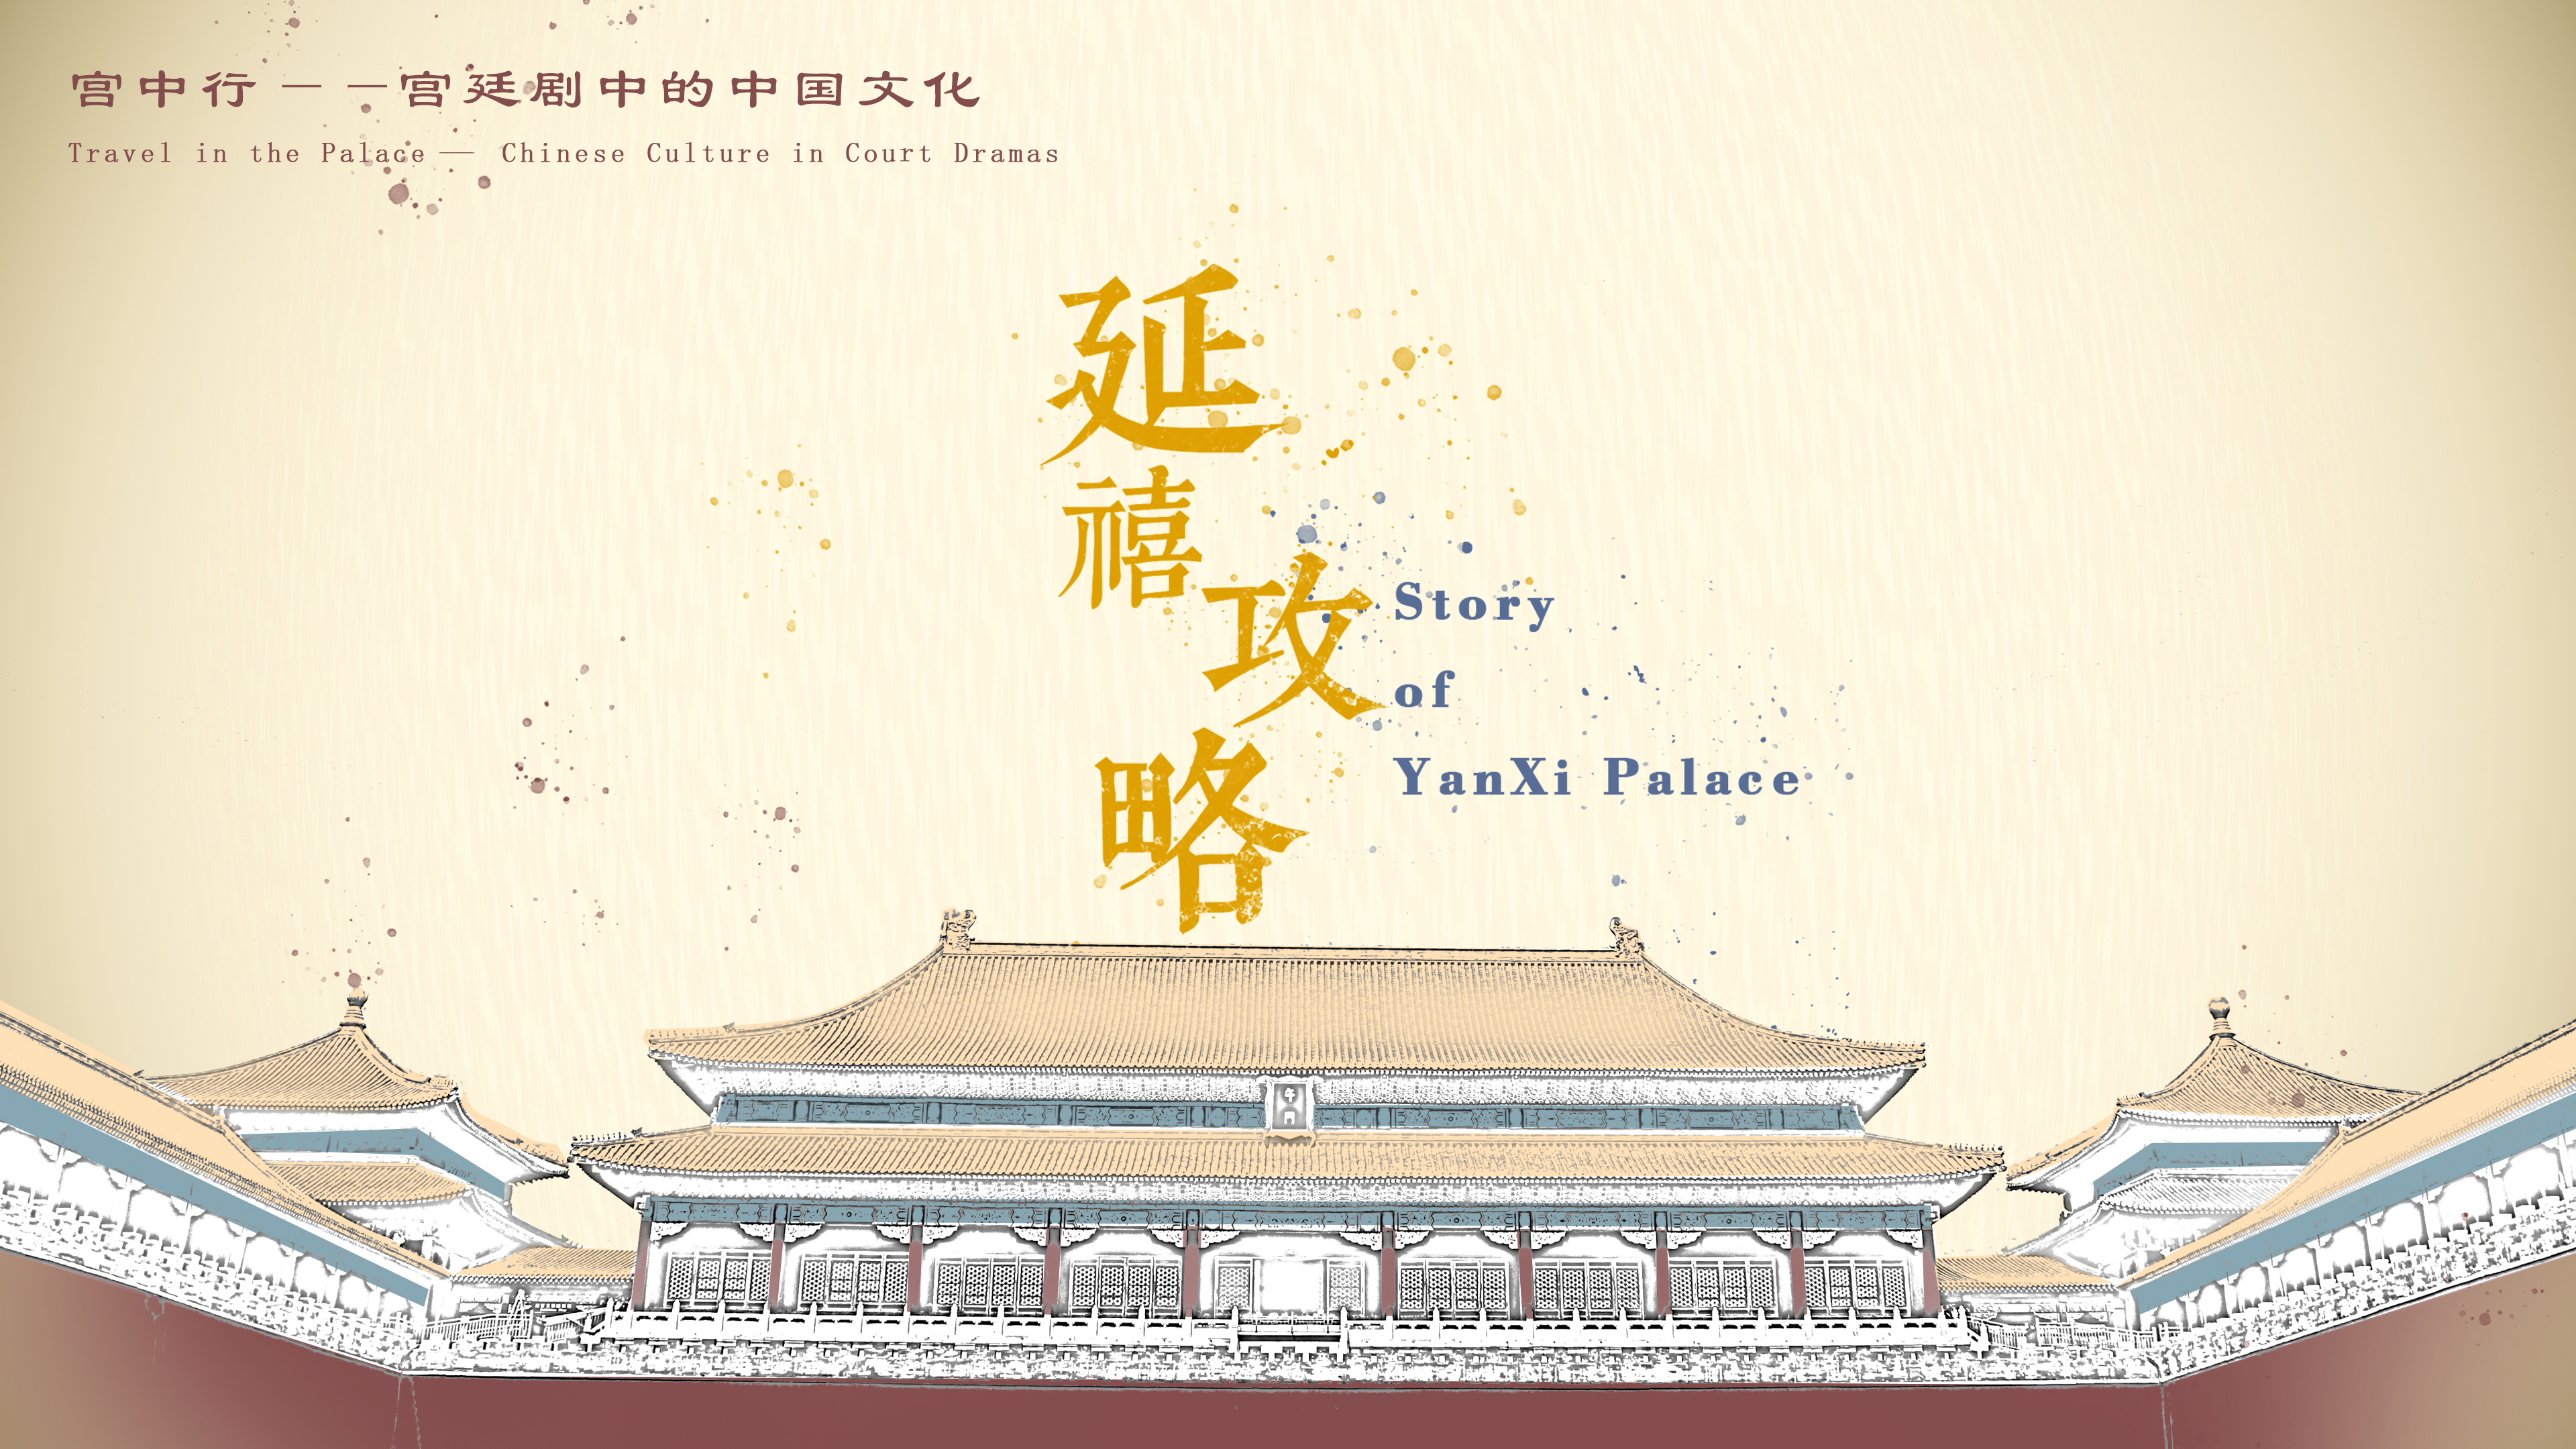 Travel in the Palace - Chinese Culture in Court Dramas: Explanation of relevant cultural contents of Story of Yanxi Palace